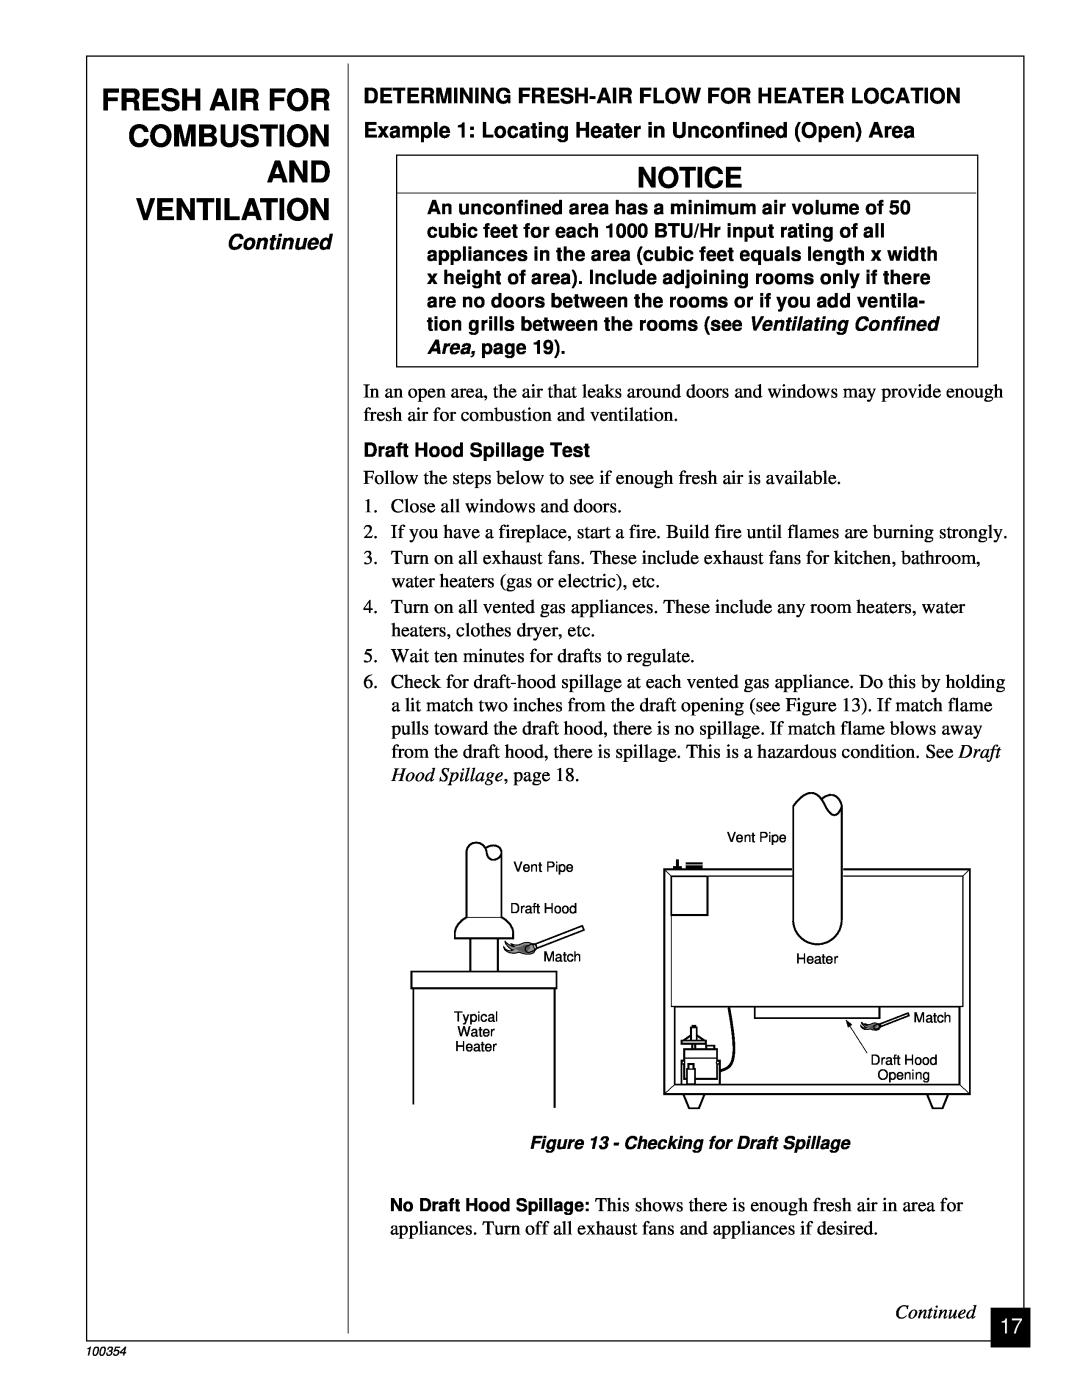 Vanguard Heating GVB35P, GVB50P installation manual Combustion, Ventilation, Fresh Air For, Continued 